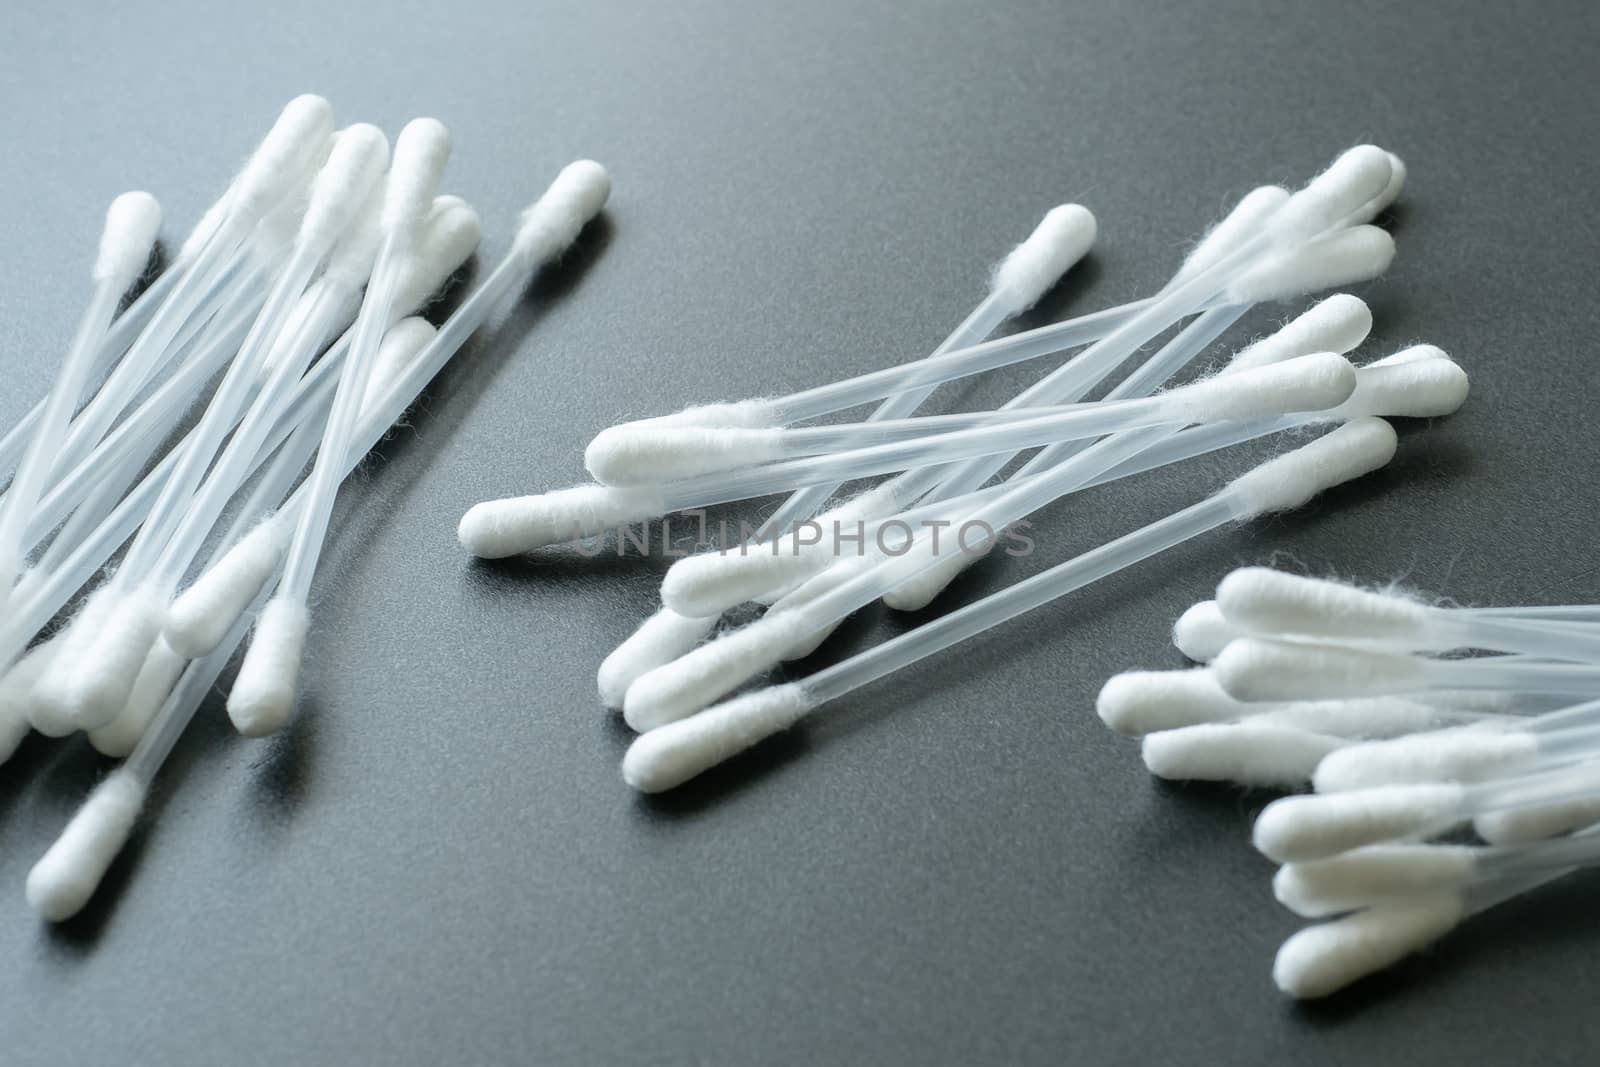 Cotton buds for cleaning ears. White cotton buds or cotton swab  by xtrekx